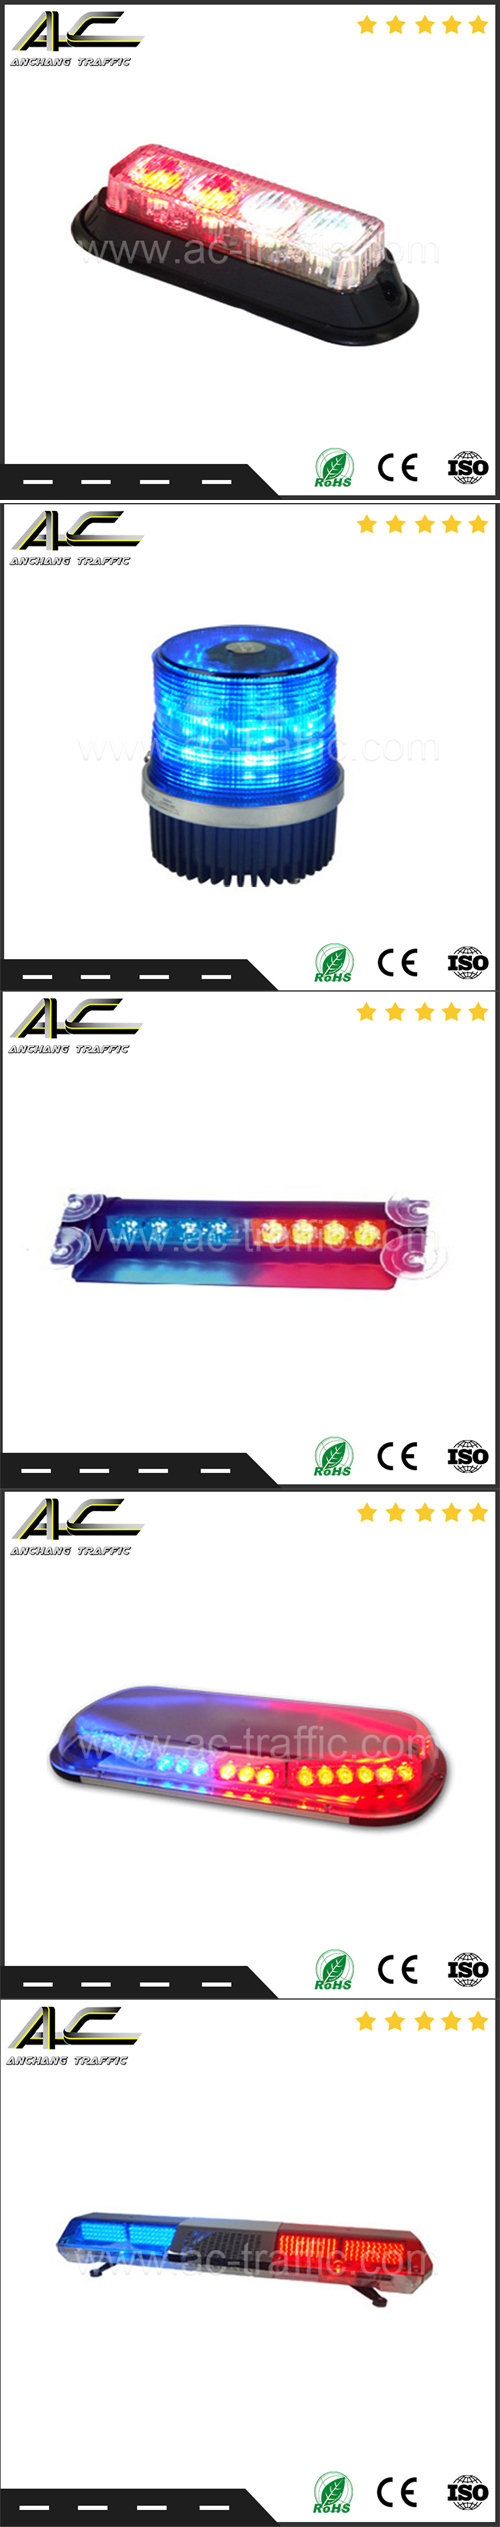 Different Type LED Visor Warning Light Light Bar with Suction Cups